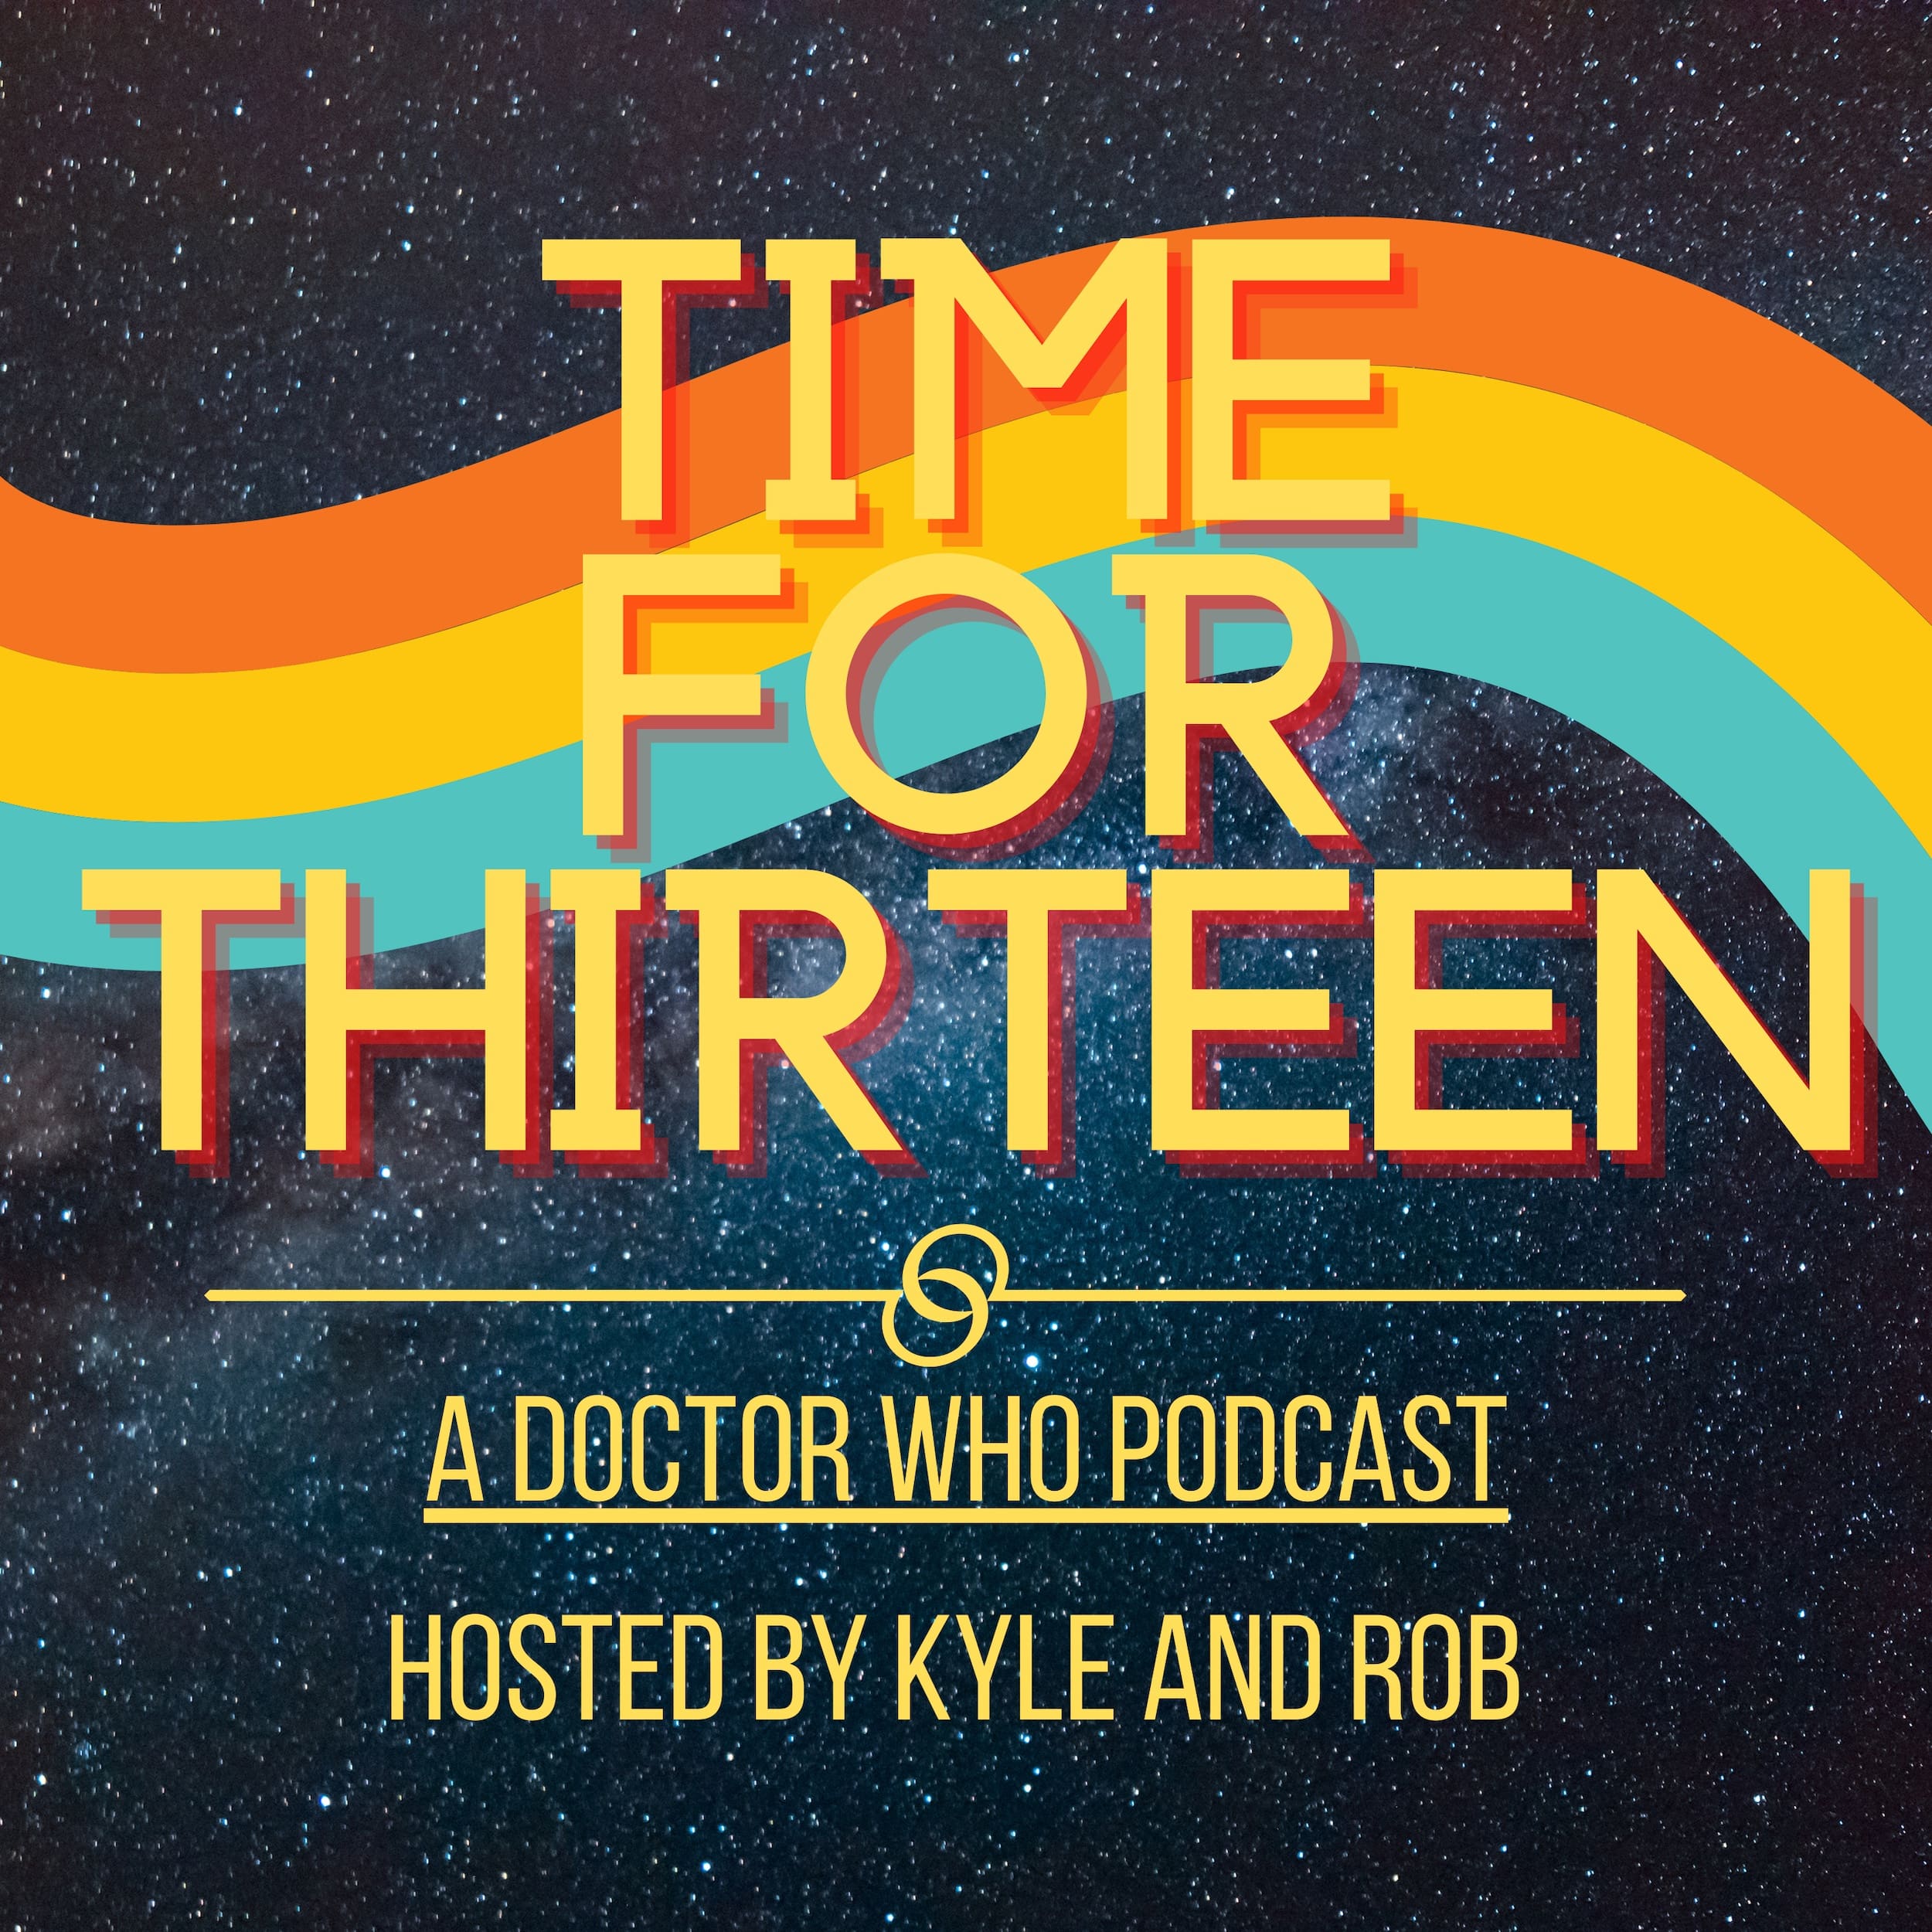 Time for Thirteen Doctor Who Podcast Logo